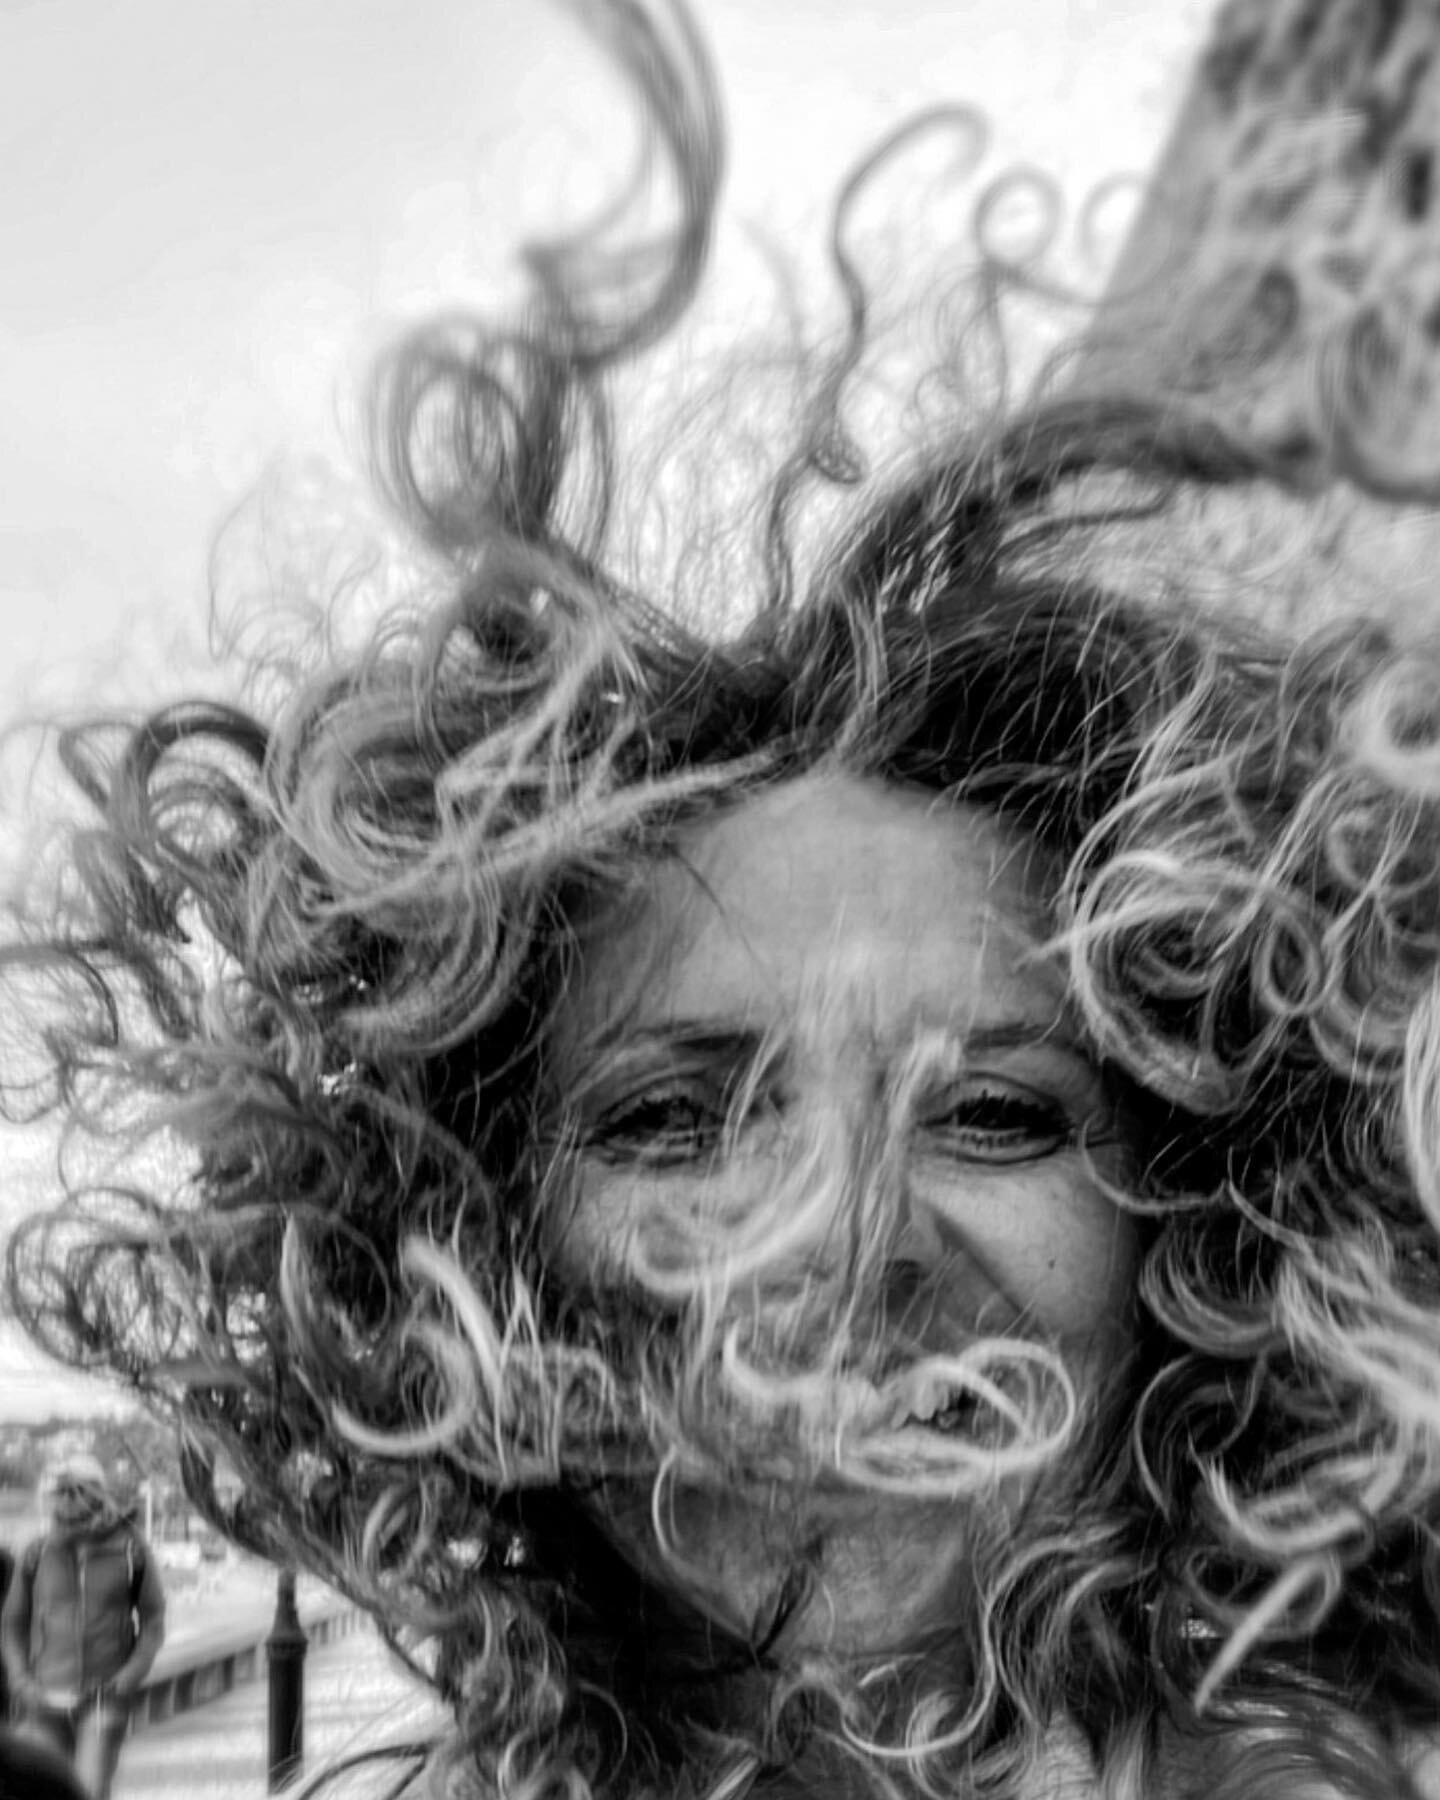 wild hair.. don&rsquo;t care&hellip;..

✨✨✨✨✨✨✨✨✨✨✨✨
we are women over 50, expressing ourselves through the art of creative self portrait photography, realizing the importance of perceiving ourselves. we want to encourage and empower each other and a